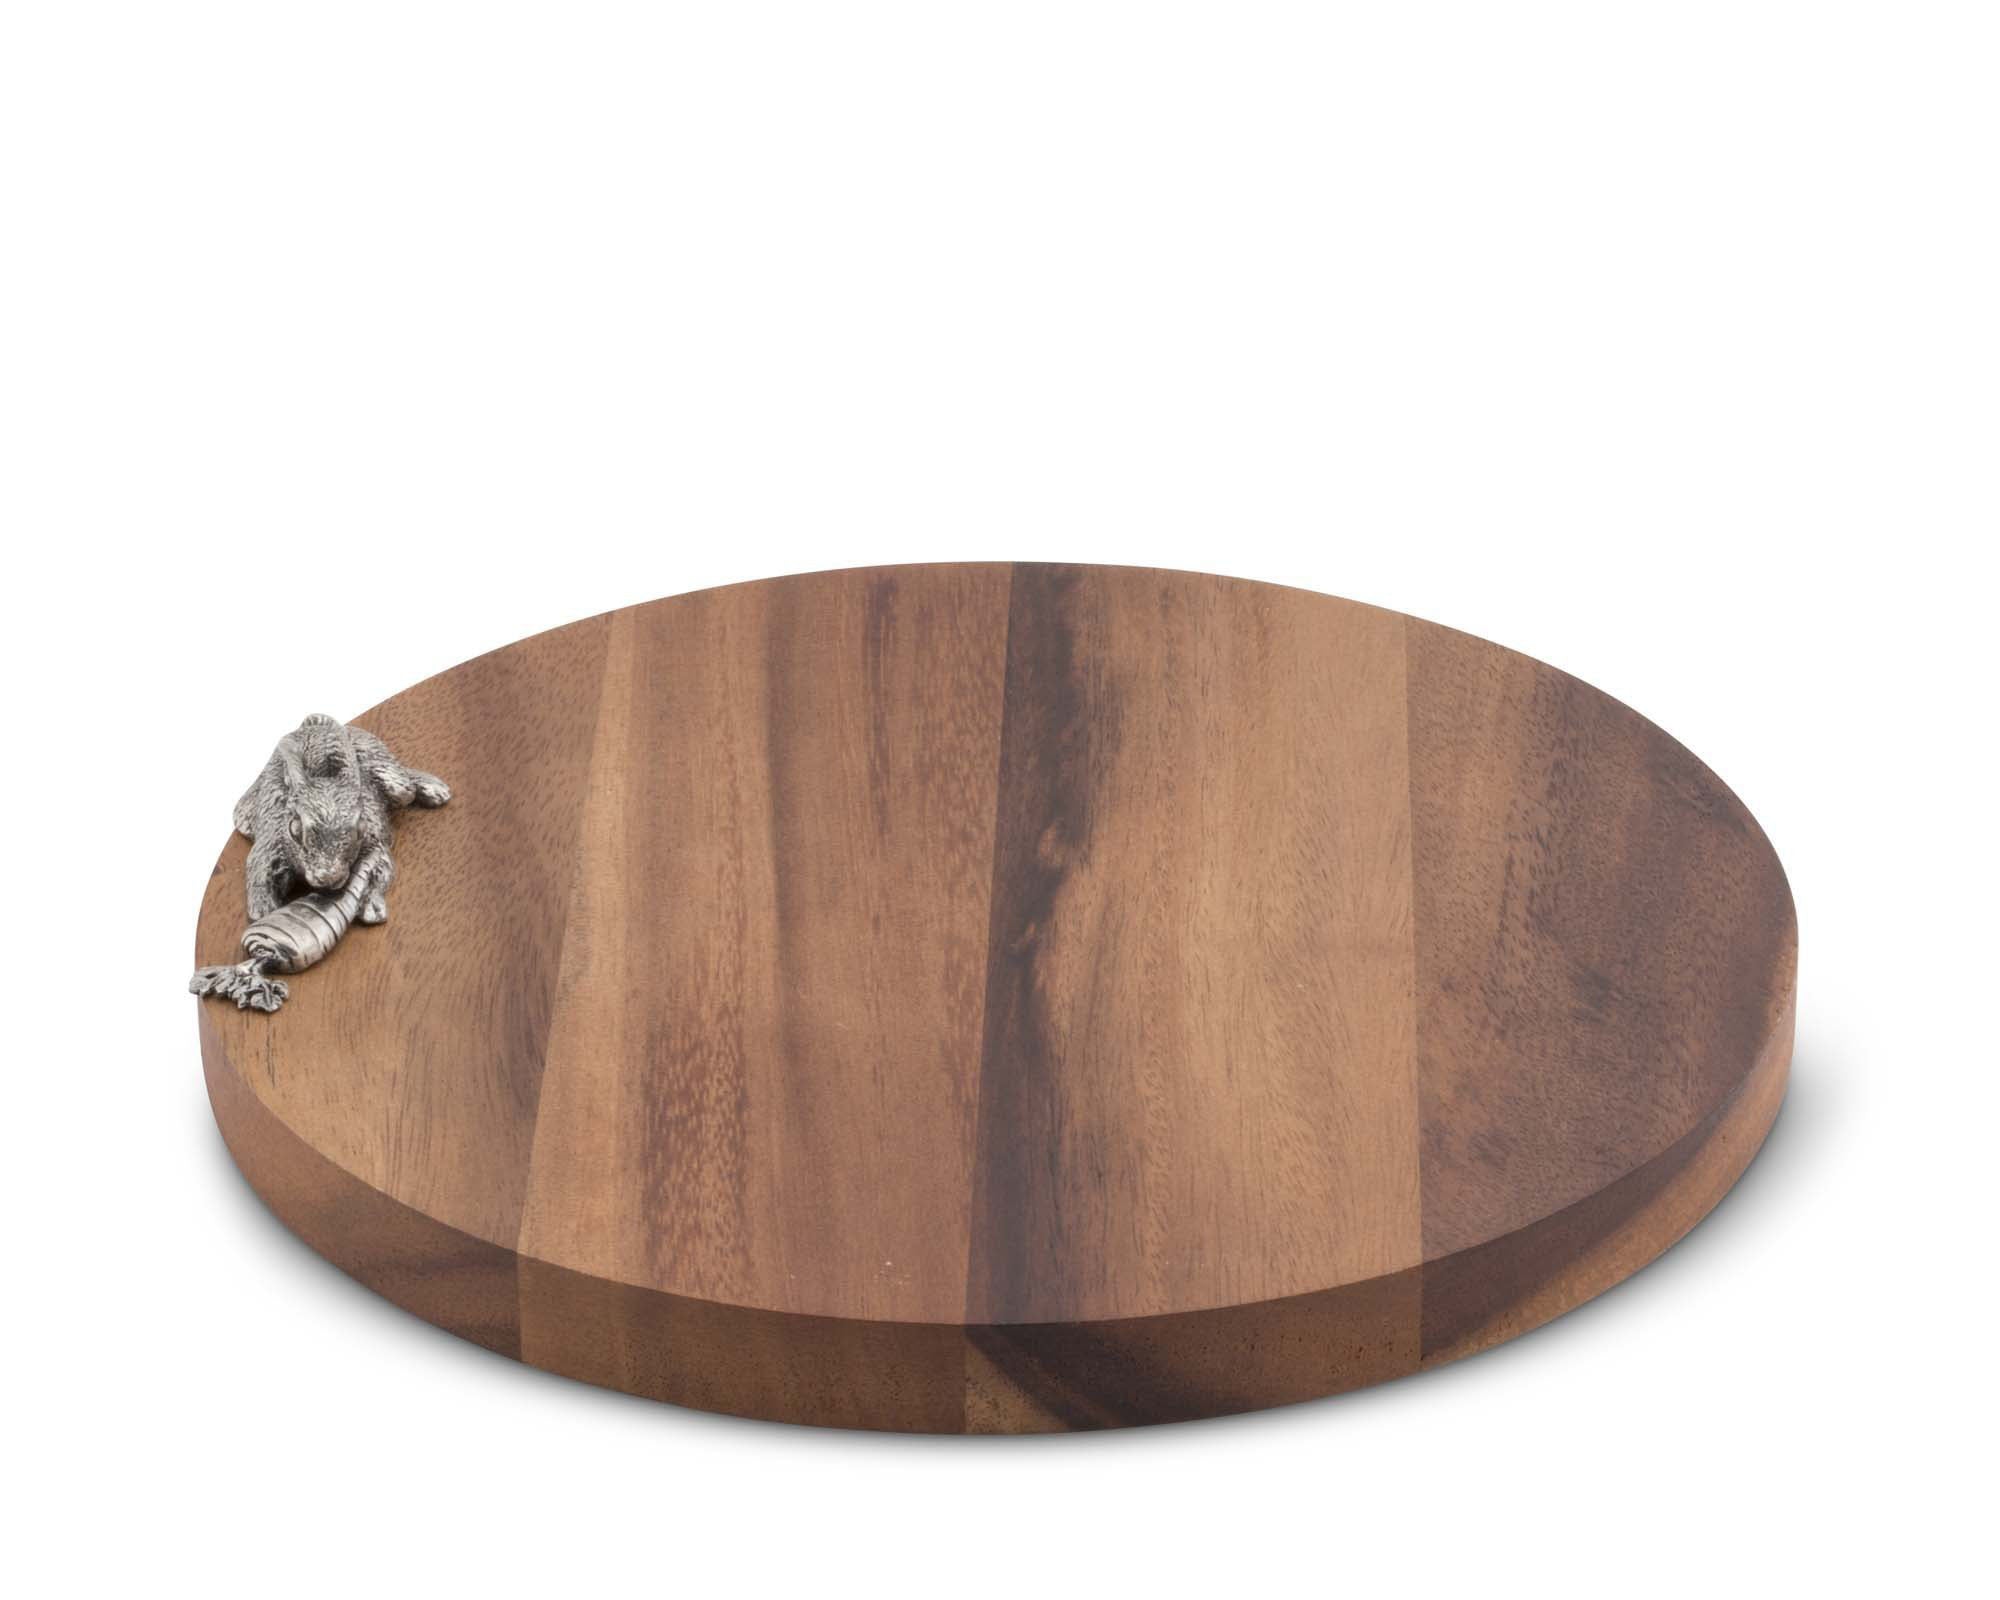 Vagabond House Rabbit Cheese Board Product Image